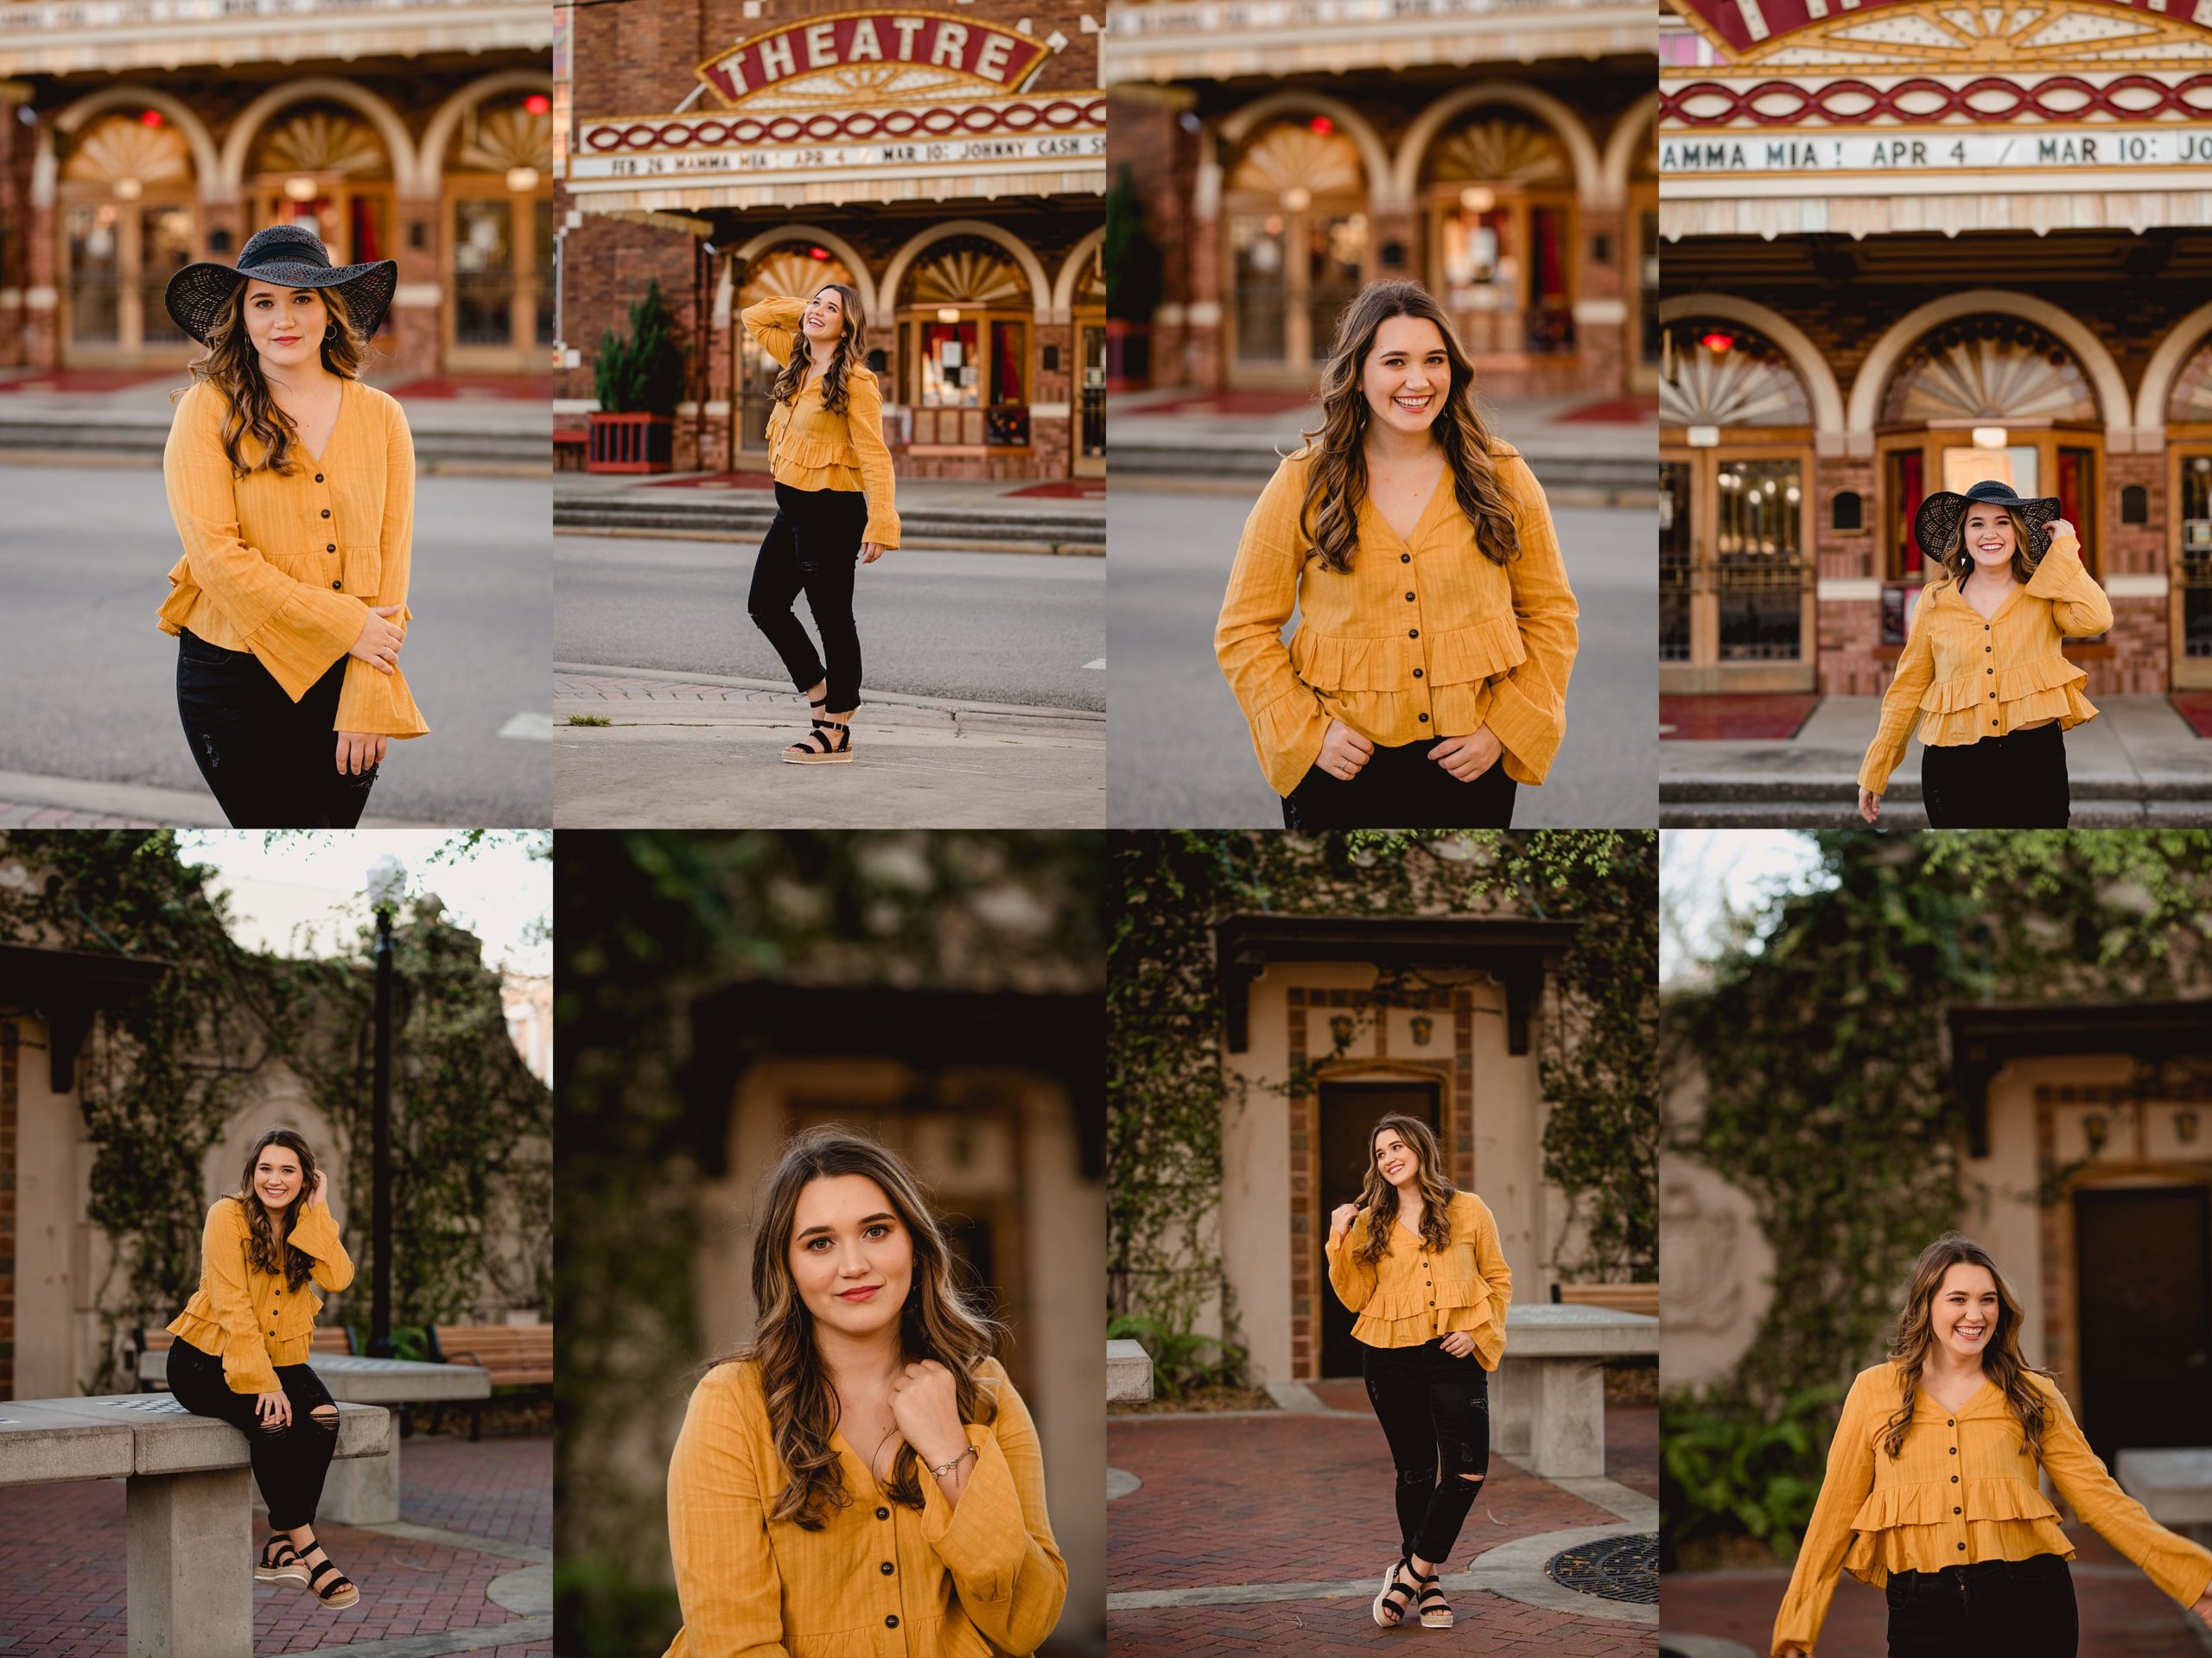 Photos of girl taken infront of old theatre in mustard color shirt.